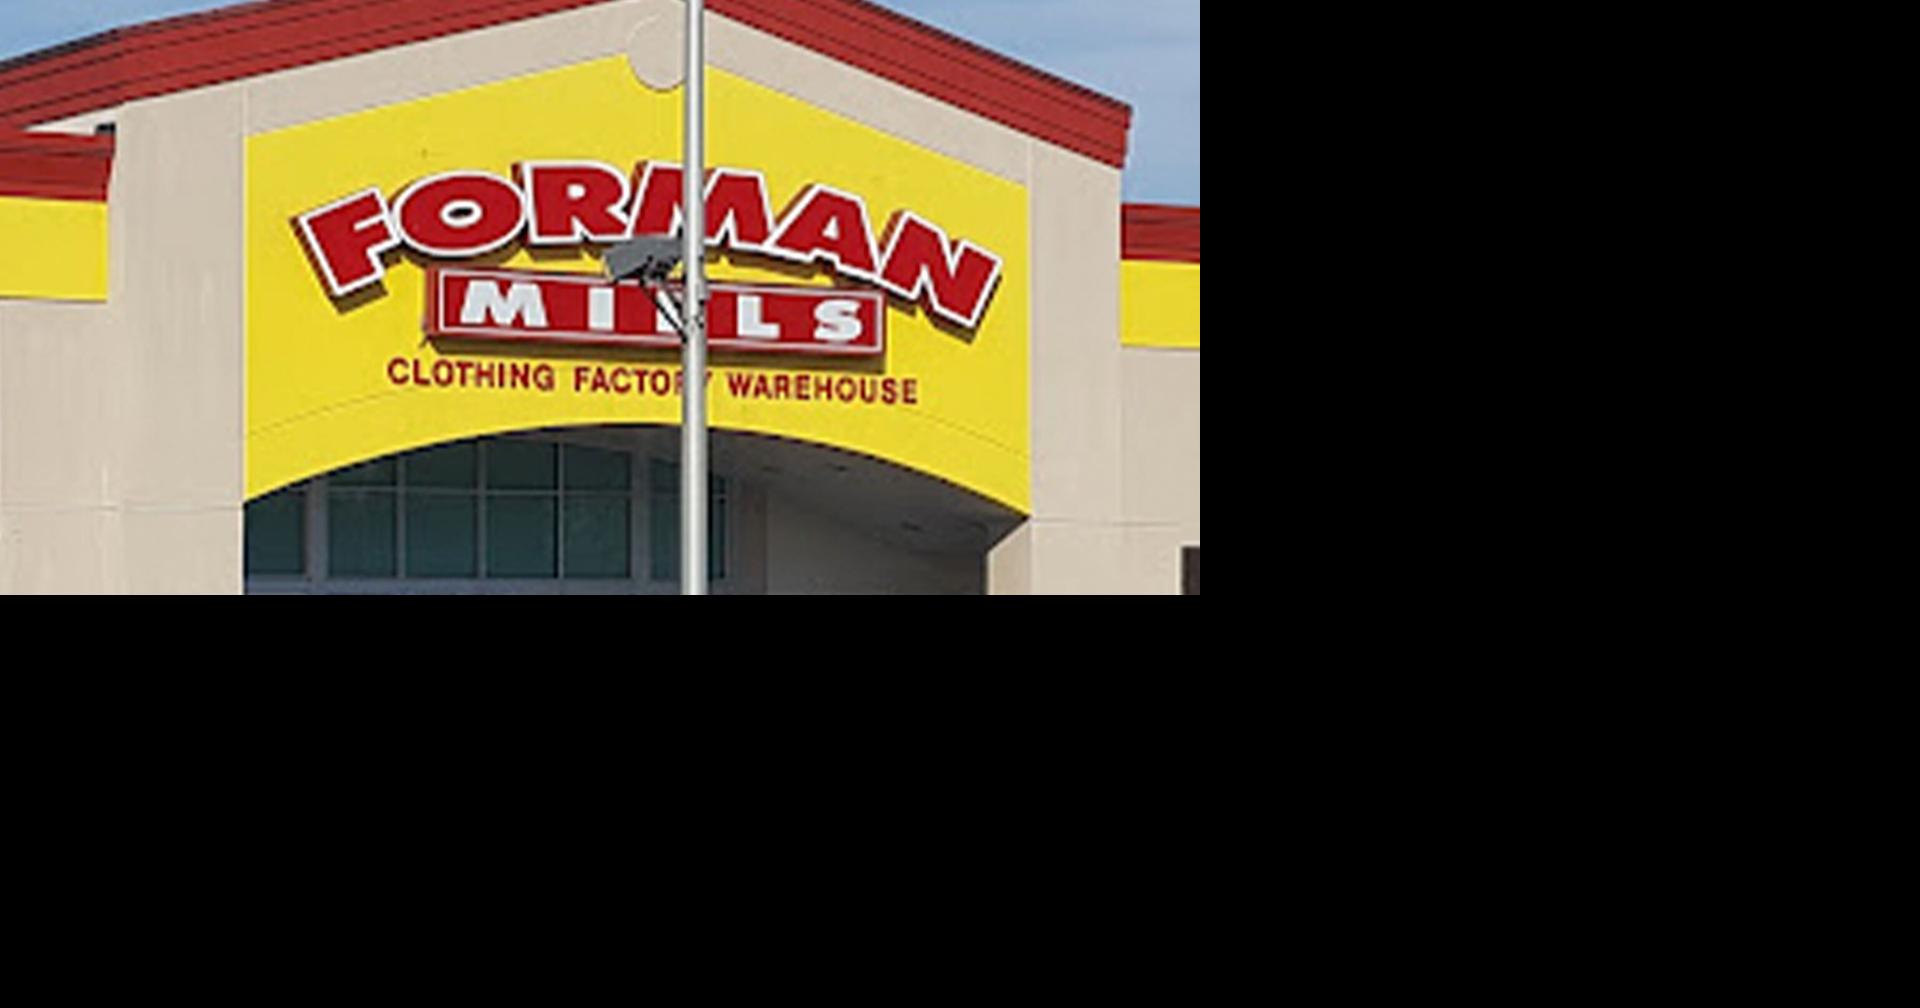 Forman Mills cutting 245 jobs in Pennsylvania, including 31 at Whitehall Township location, state says